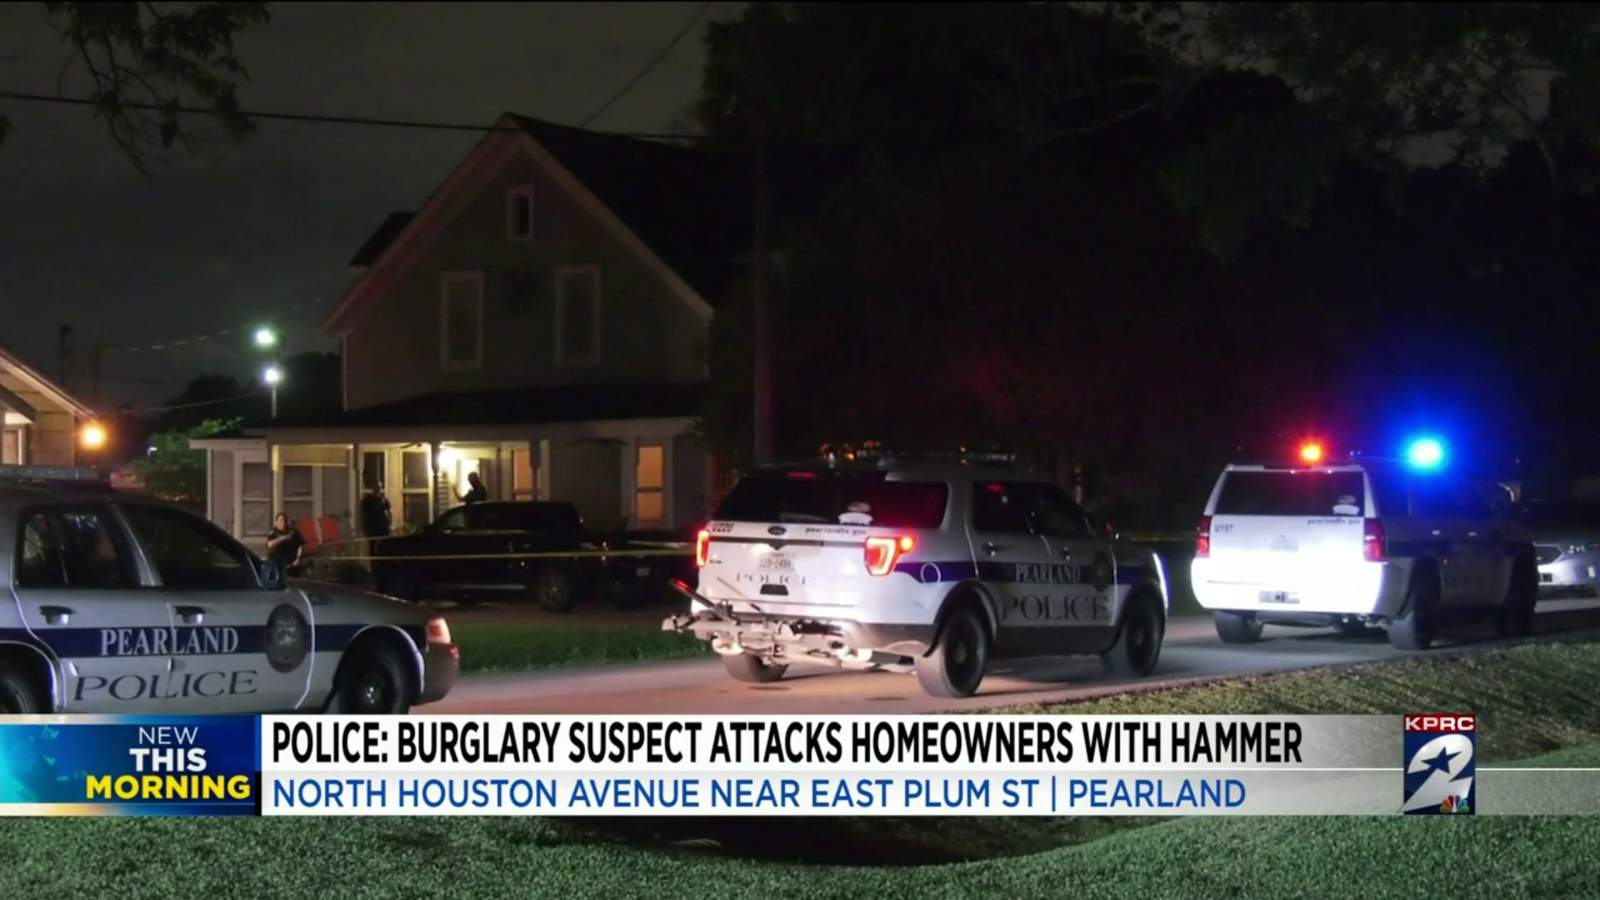 Hammer-wielding man breaks into Pearland home, shot multiple times after attacking gun-wielding homeowner, officials say